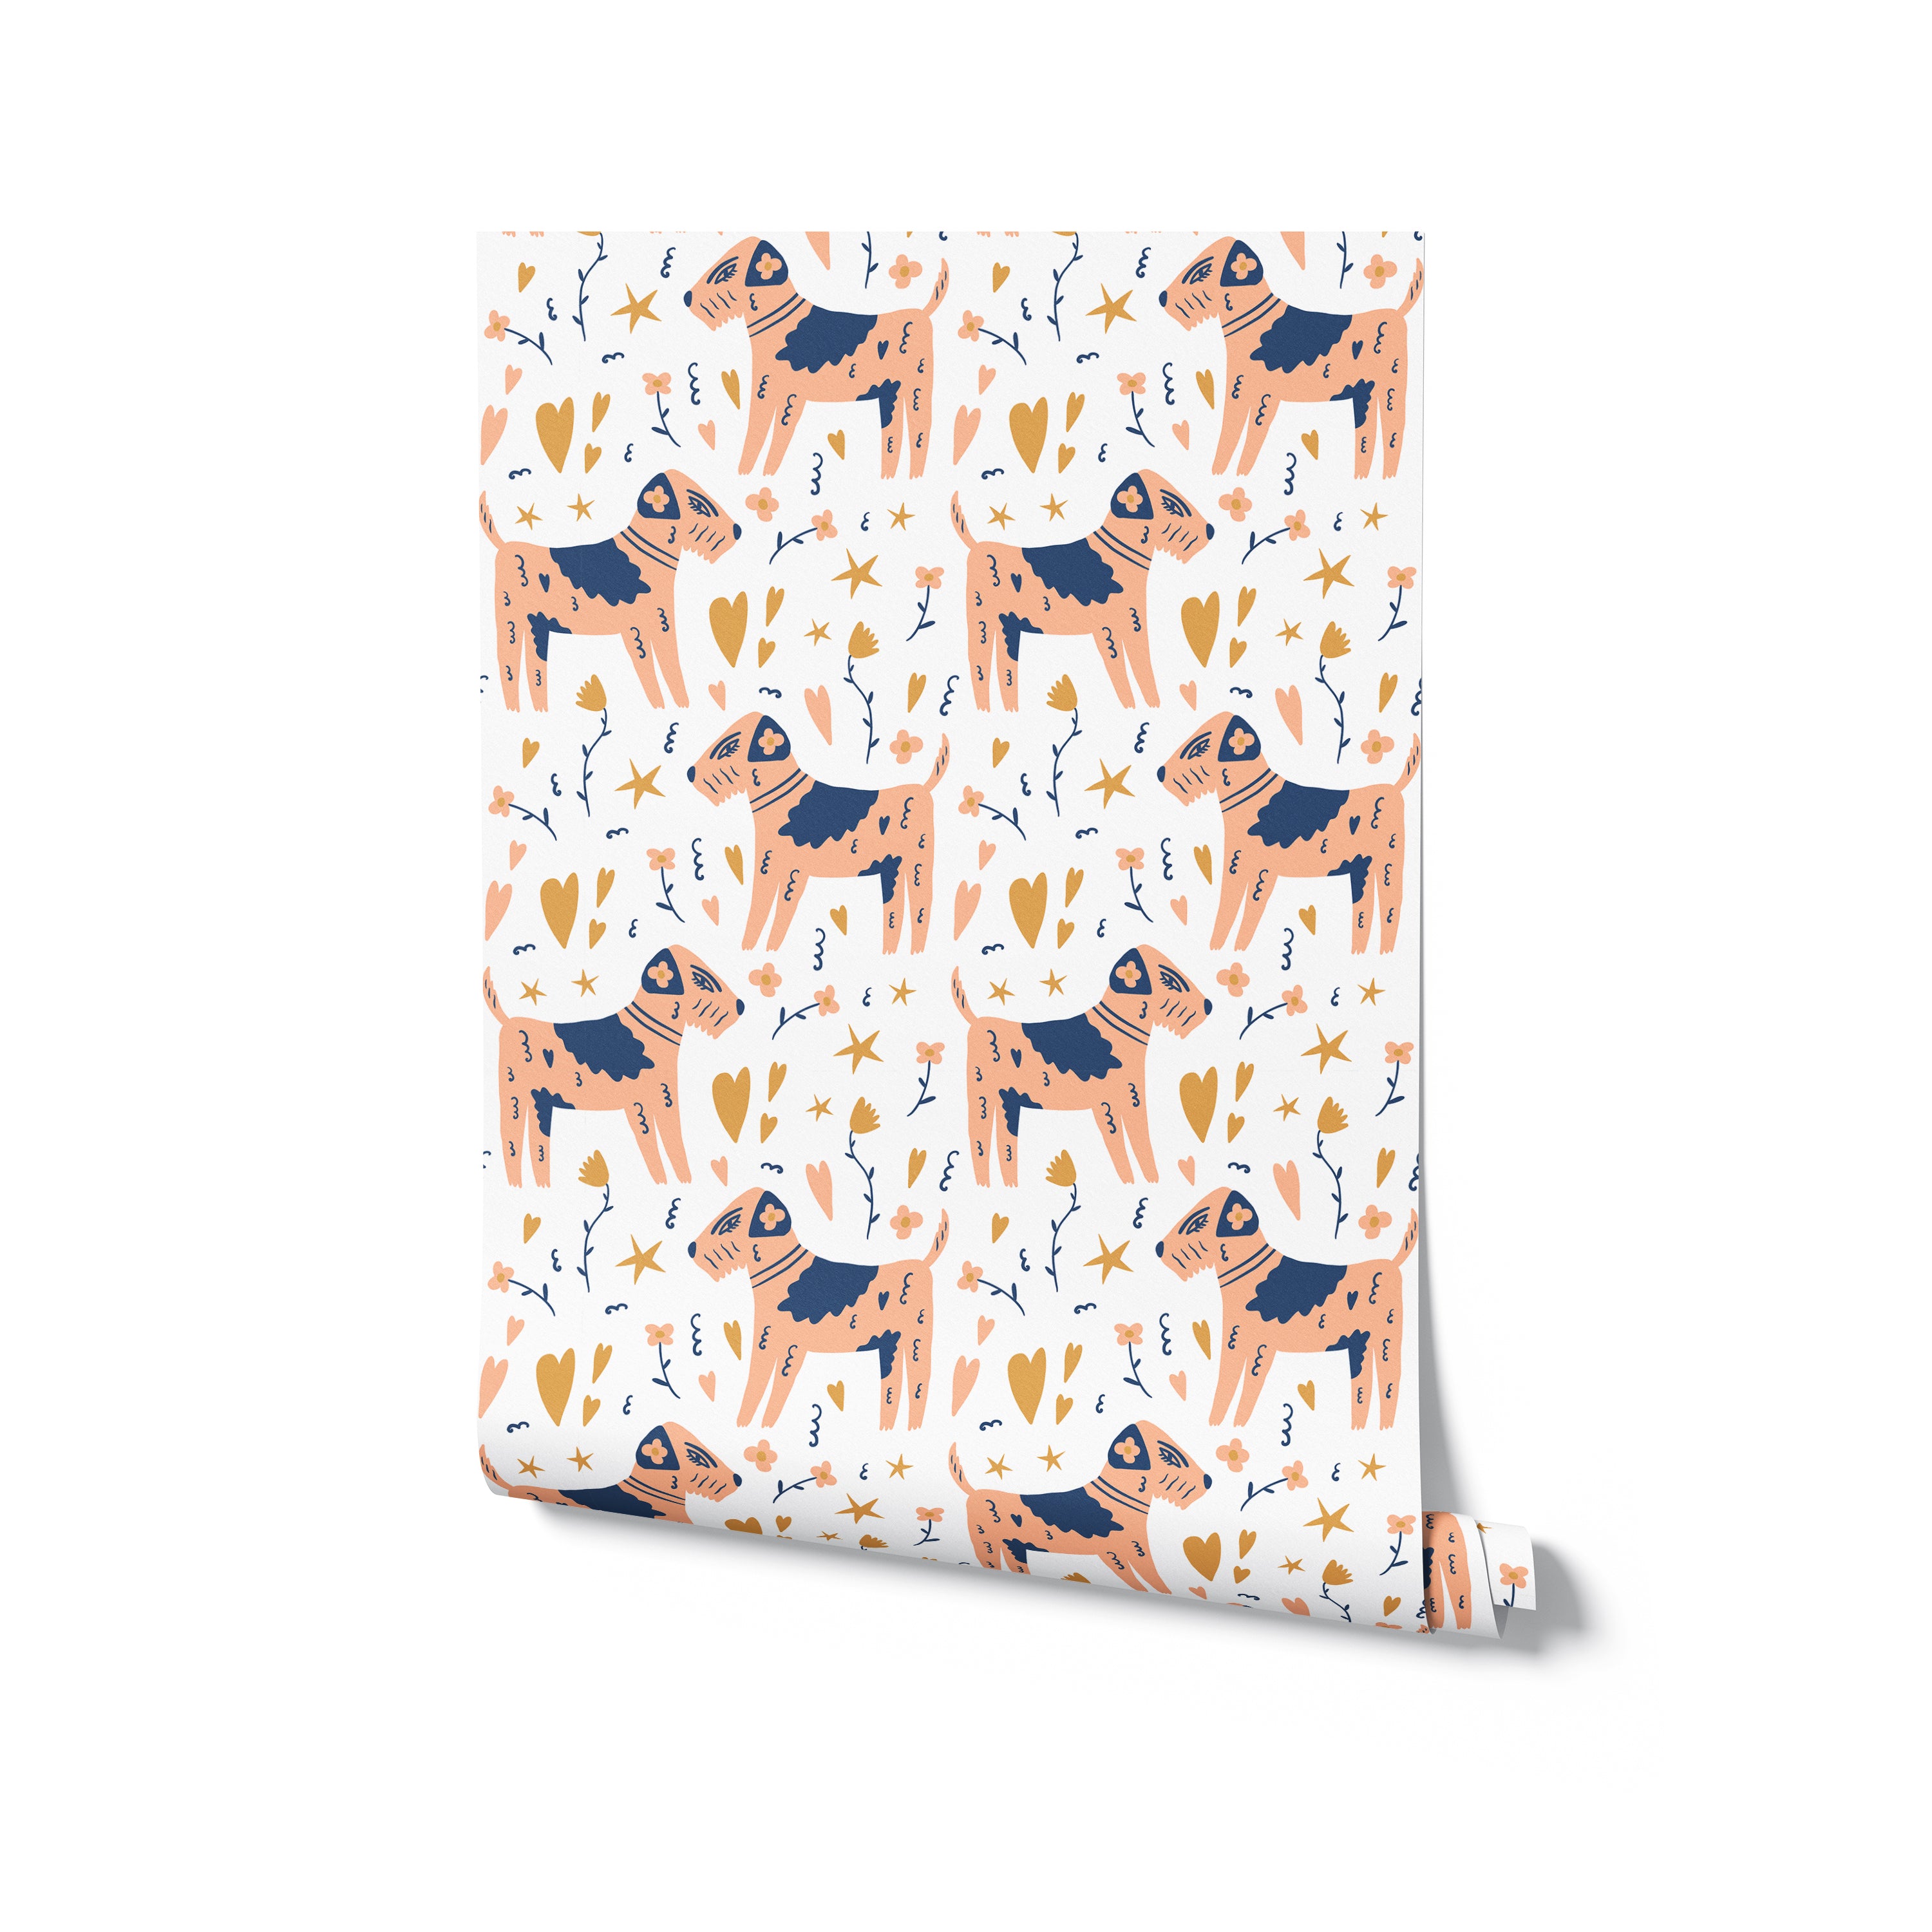 A roll of 'Dog Wallpaper 38' illustrating a charming pattern with peach dogs and playful celestial and floral elements. This wallpaper combines creativity and warmth, ideal for decorating nurseries or playful living spaces.